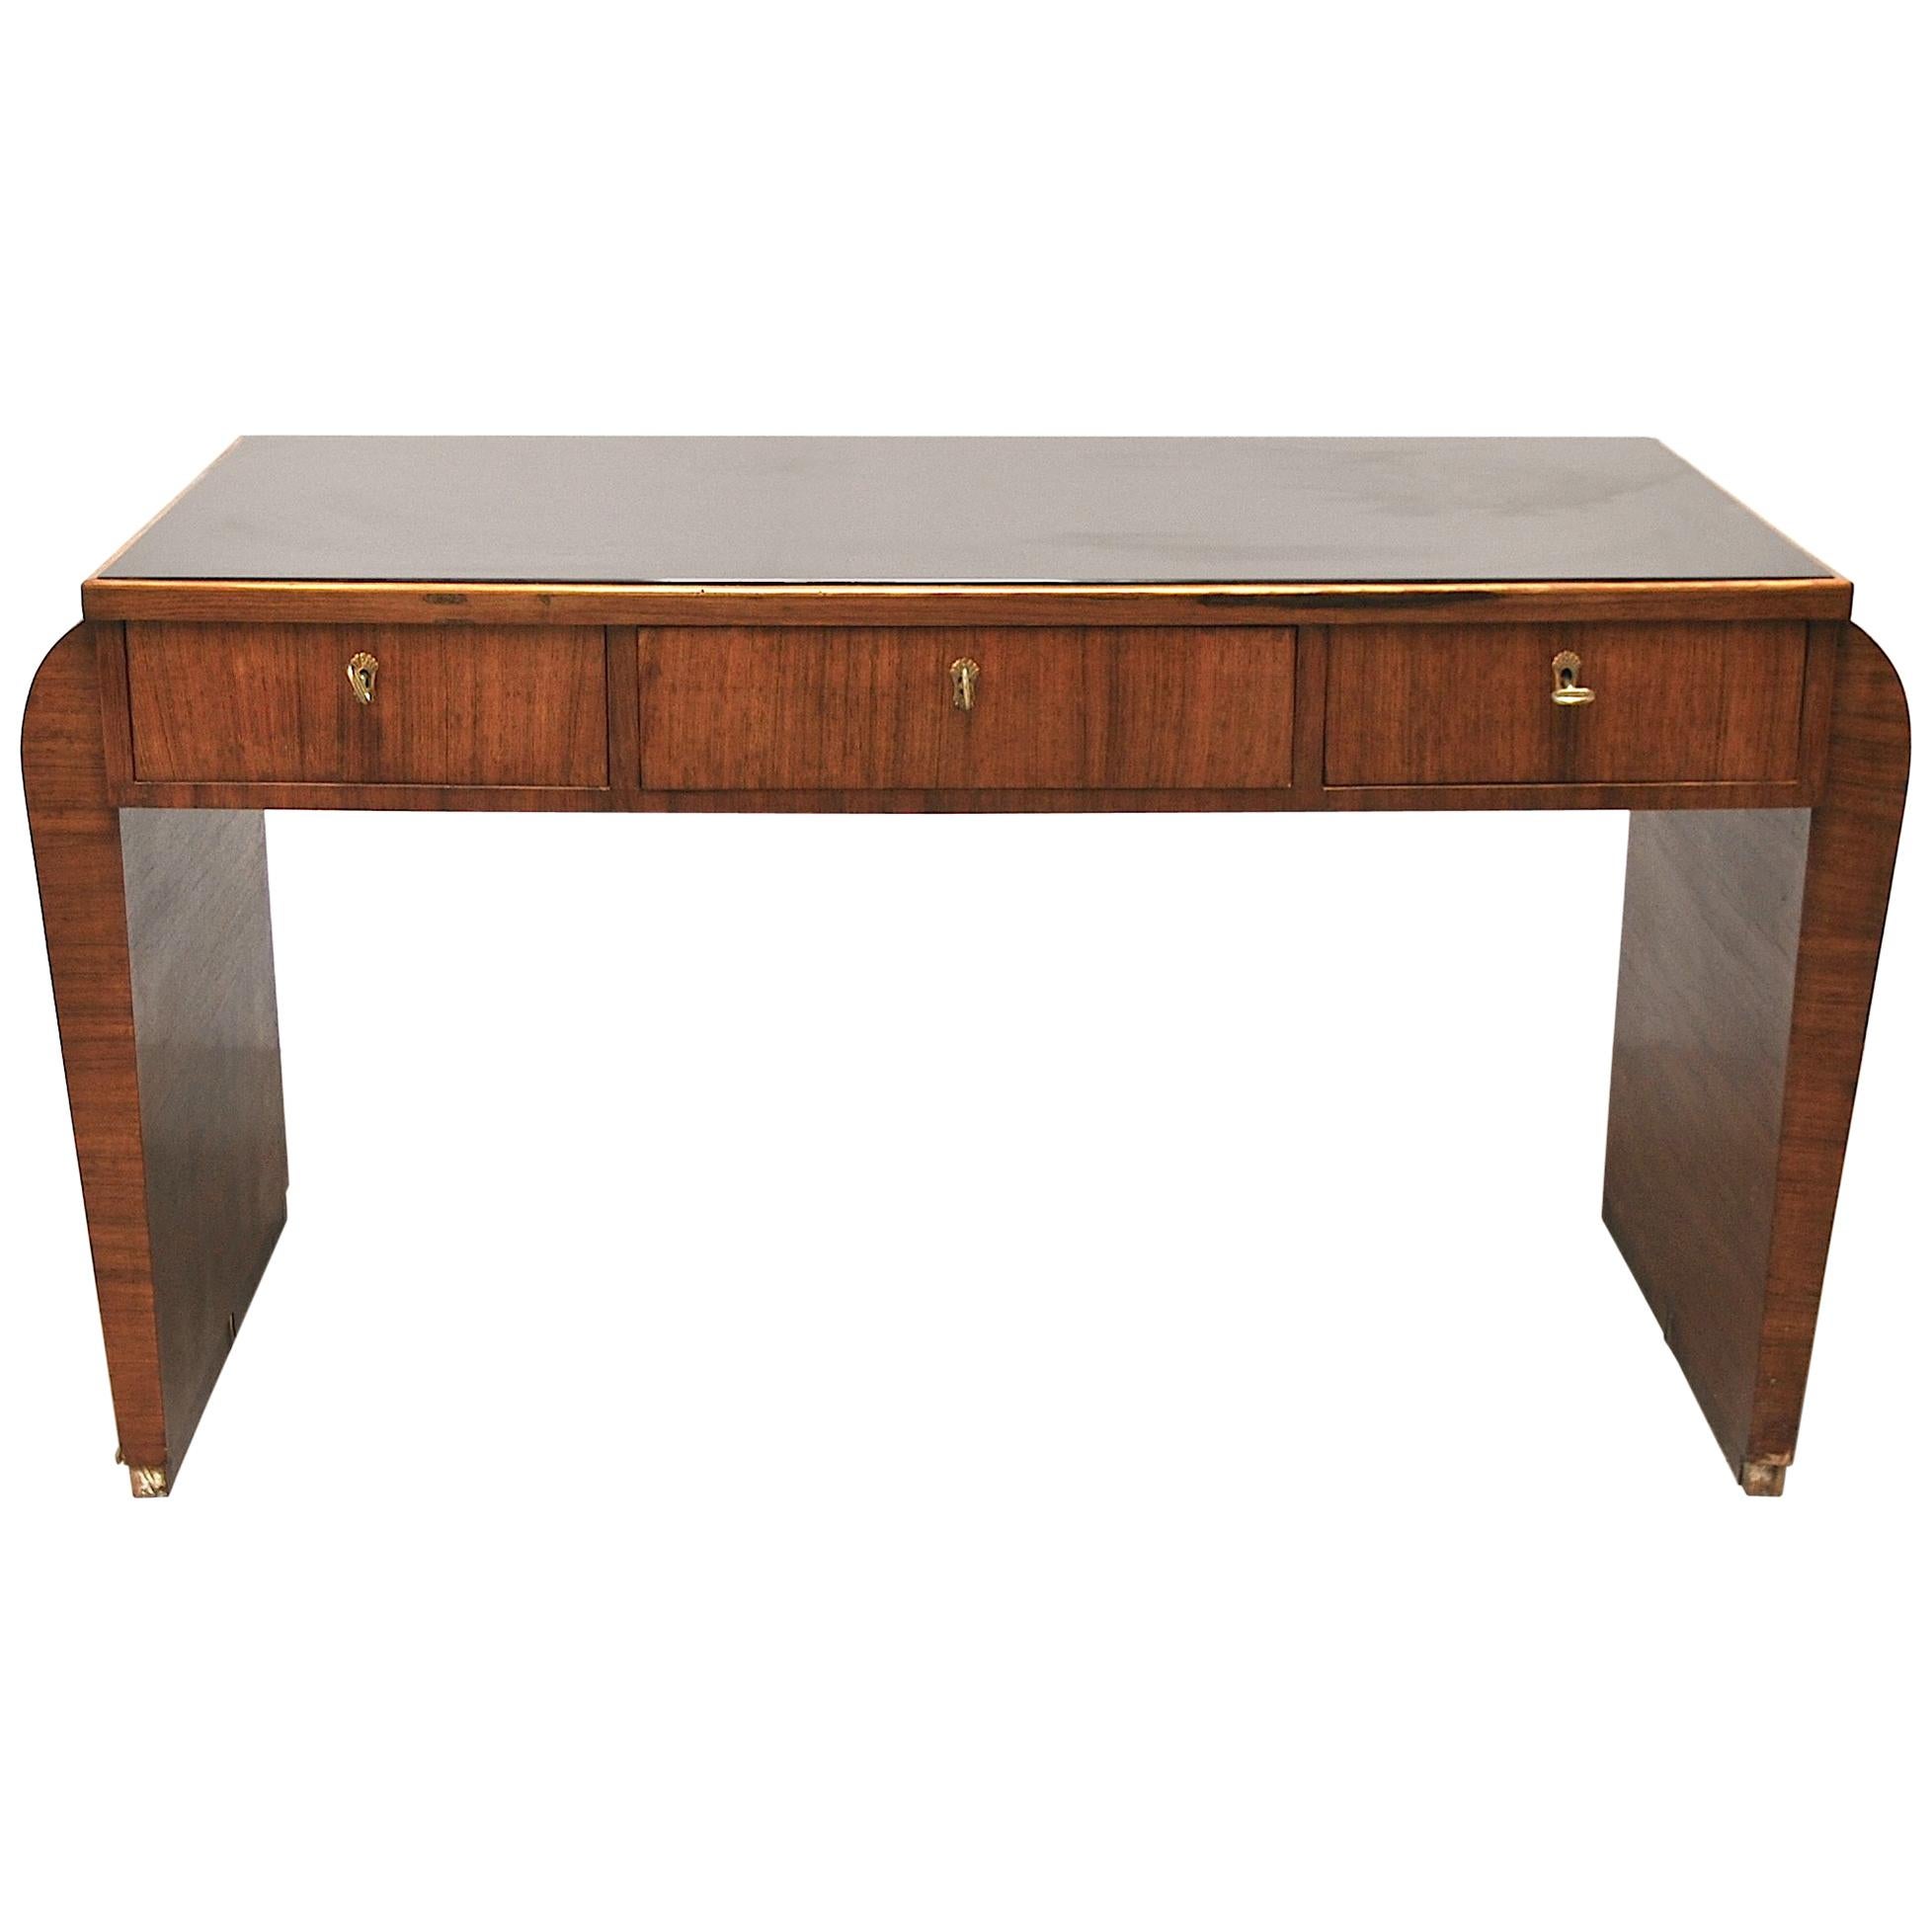 Midcentury Italian Rationalist Writing Table with Brass Finishes, 1930s